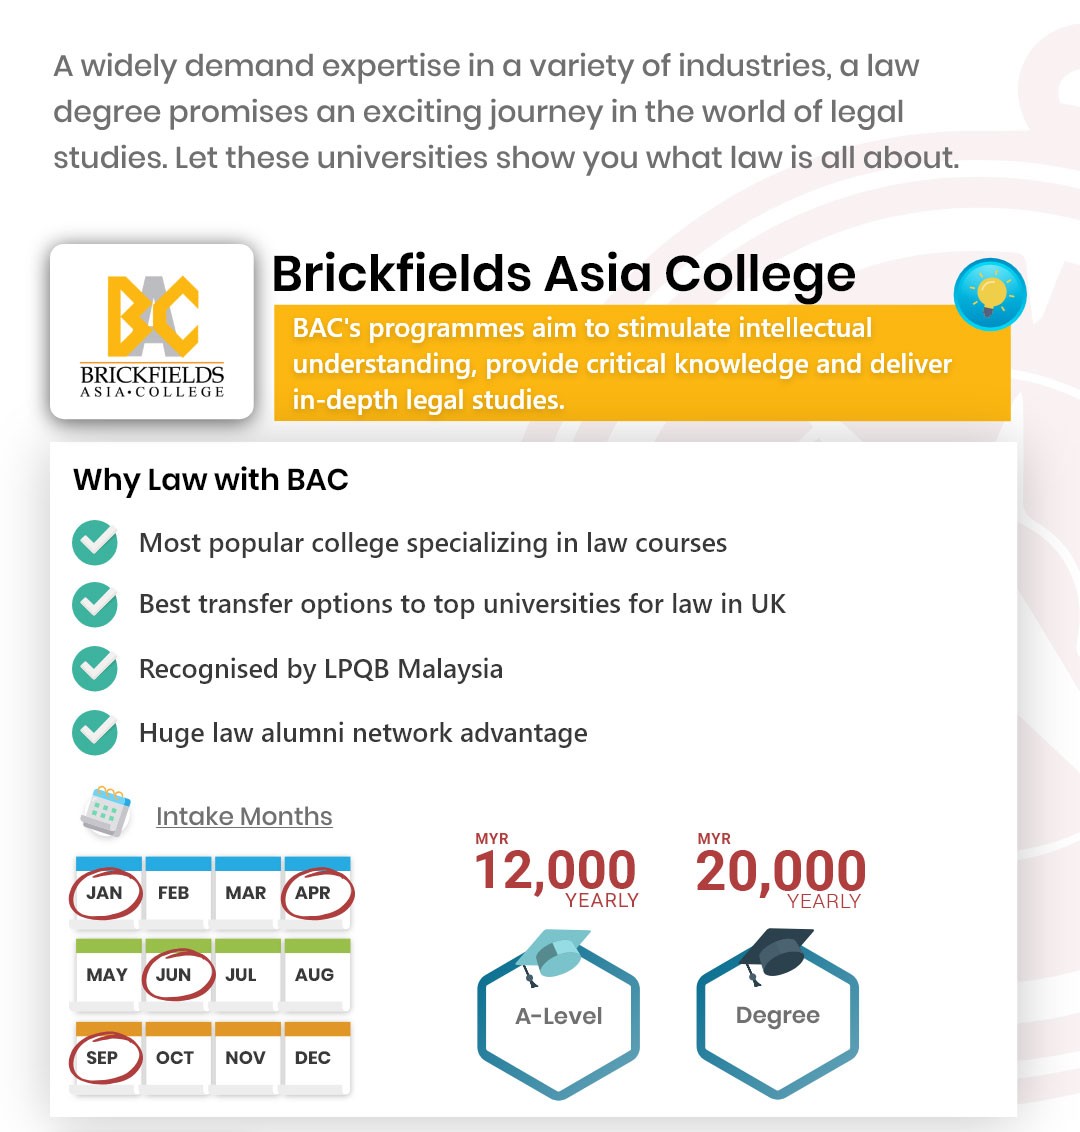 List of reasons studying law in brickfields asia college (BAC)